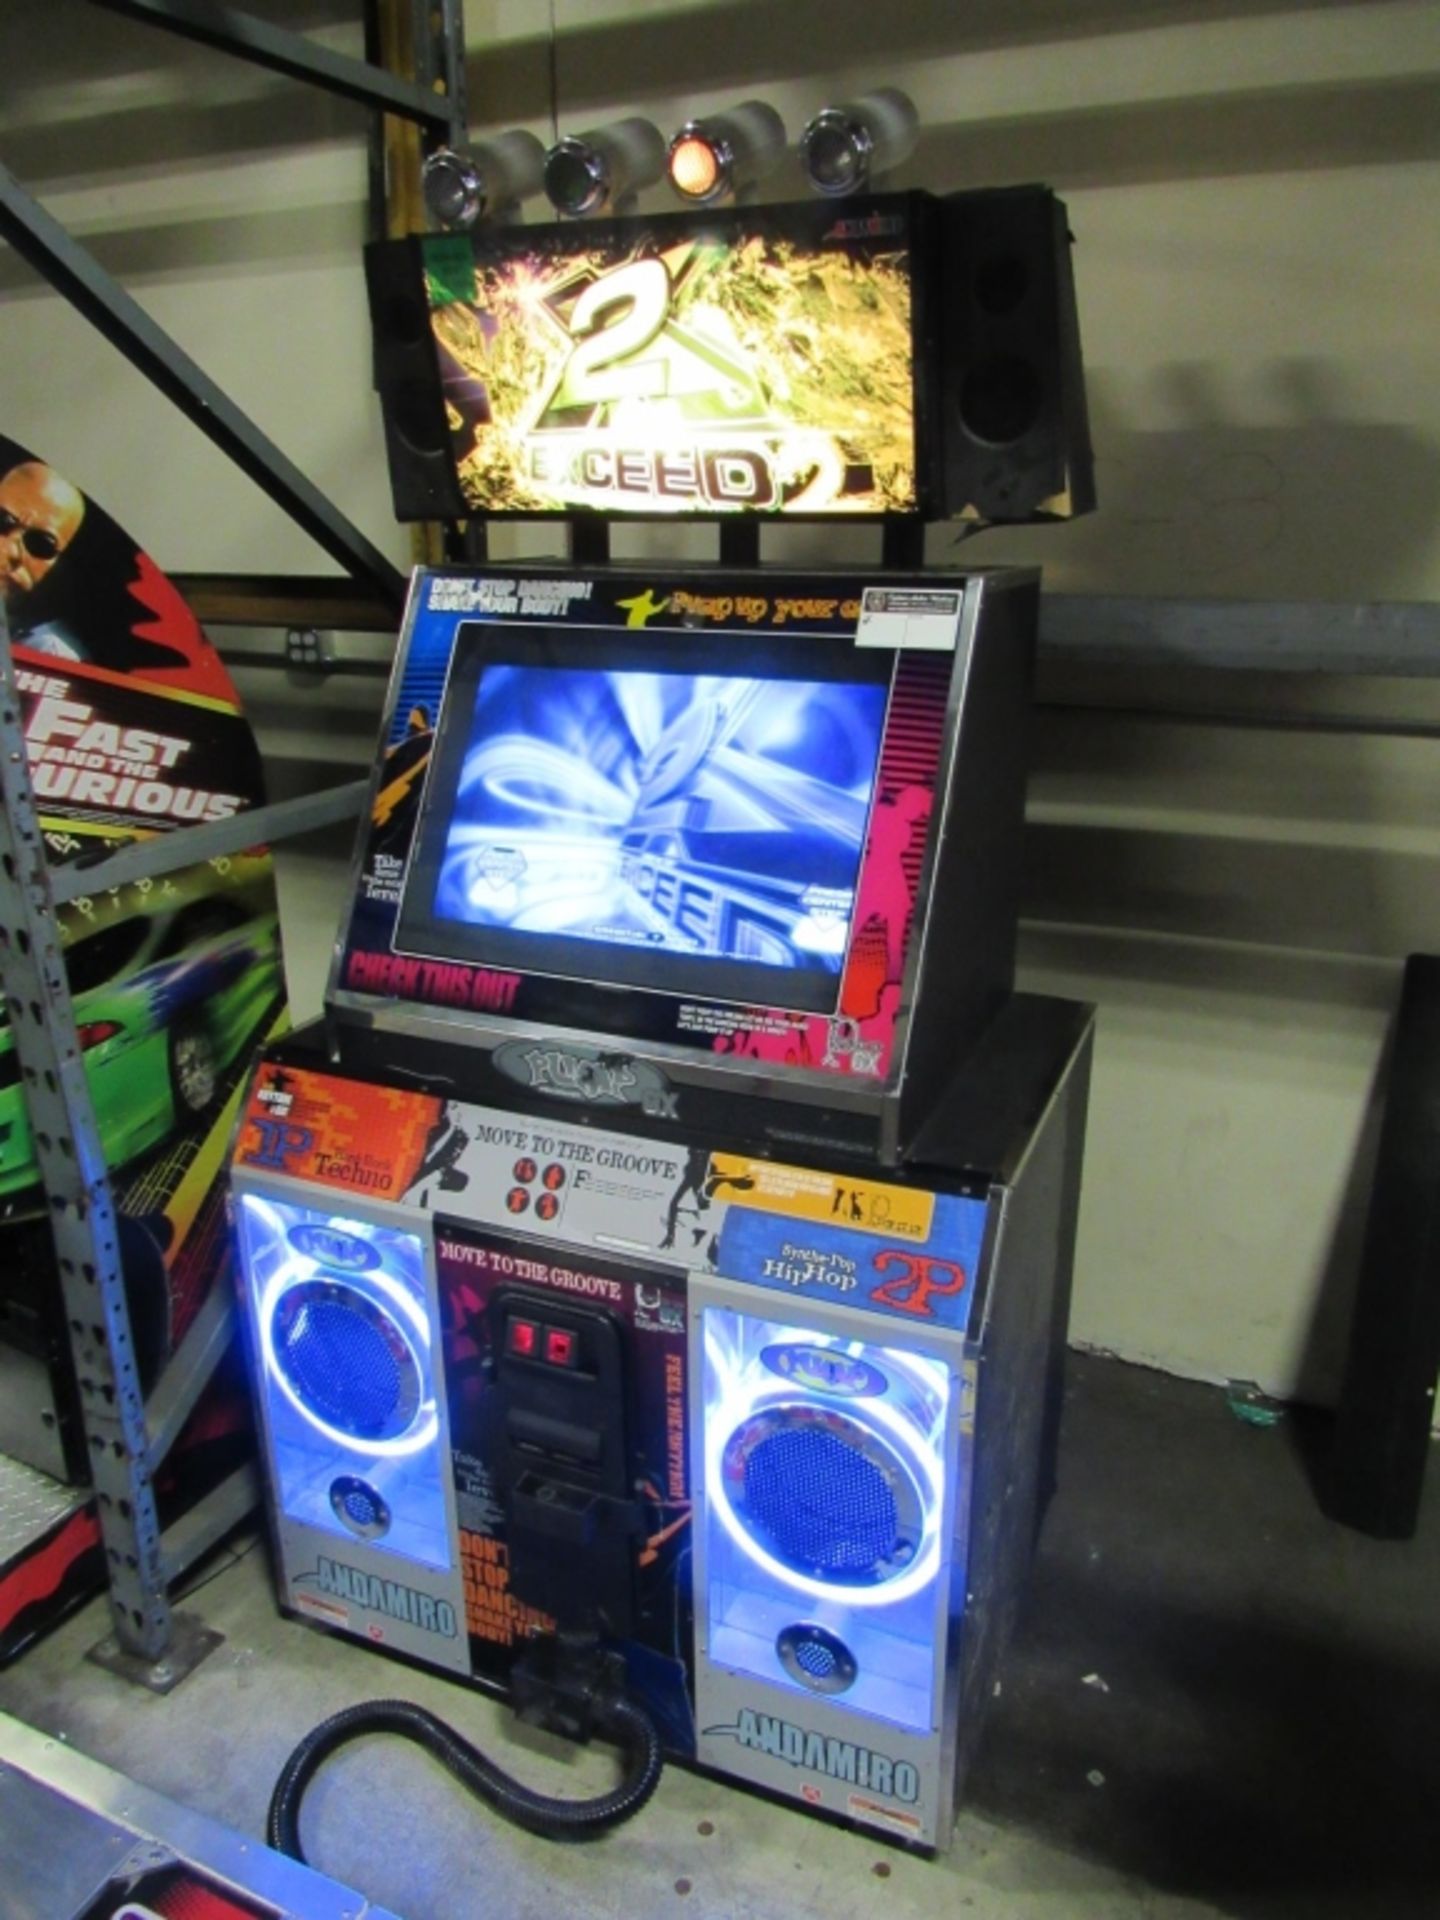 PUMP IT UP NX EXCEED 2 DANCE ARCADE GAME - Image 5 of 5